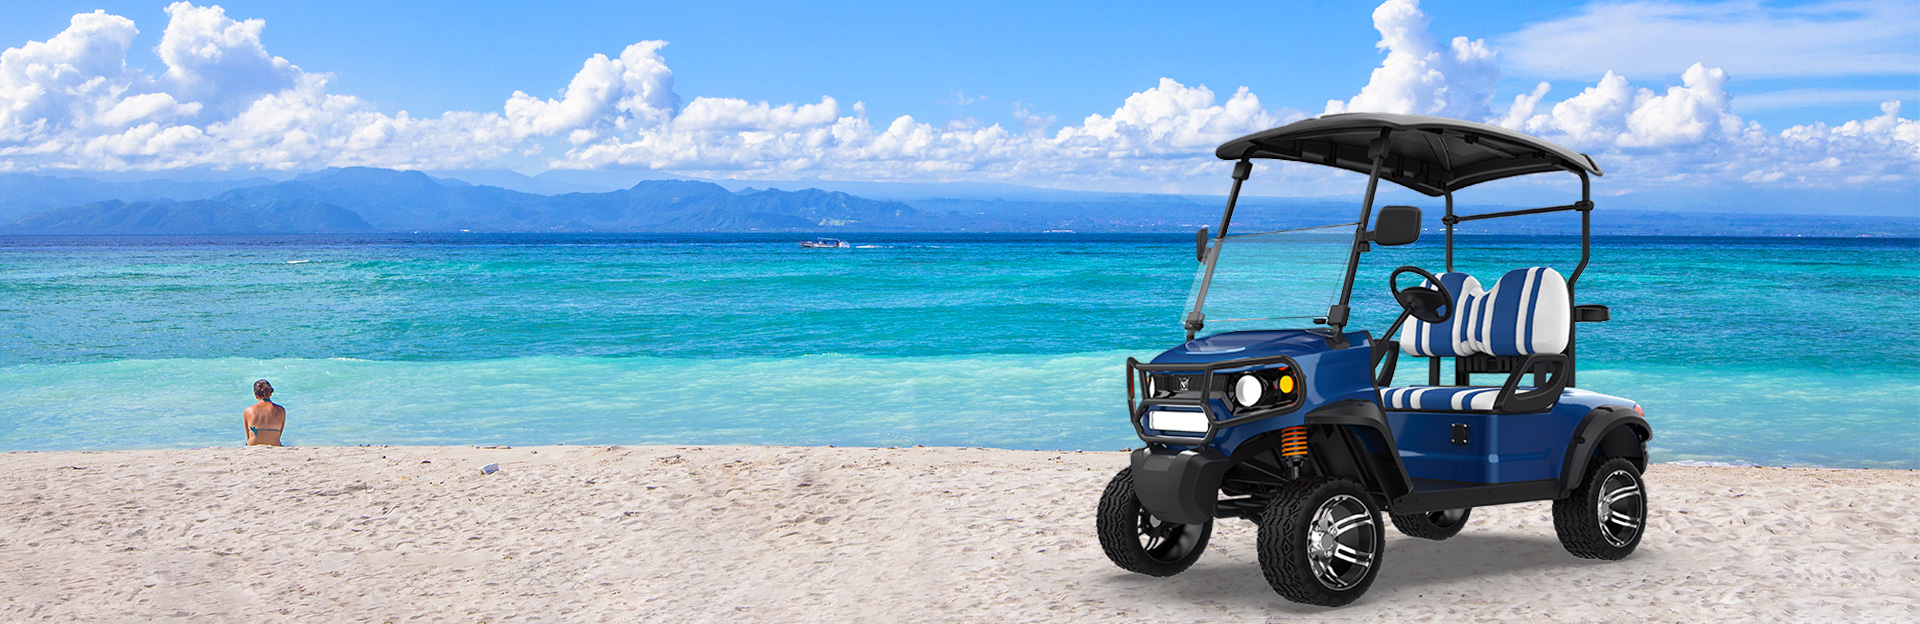 Unleash the Joy of Golfing with Our Ultimate Golf Cart Experience!